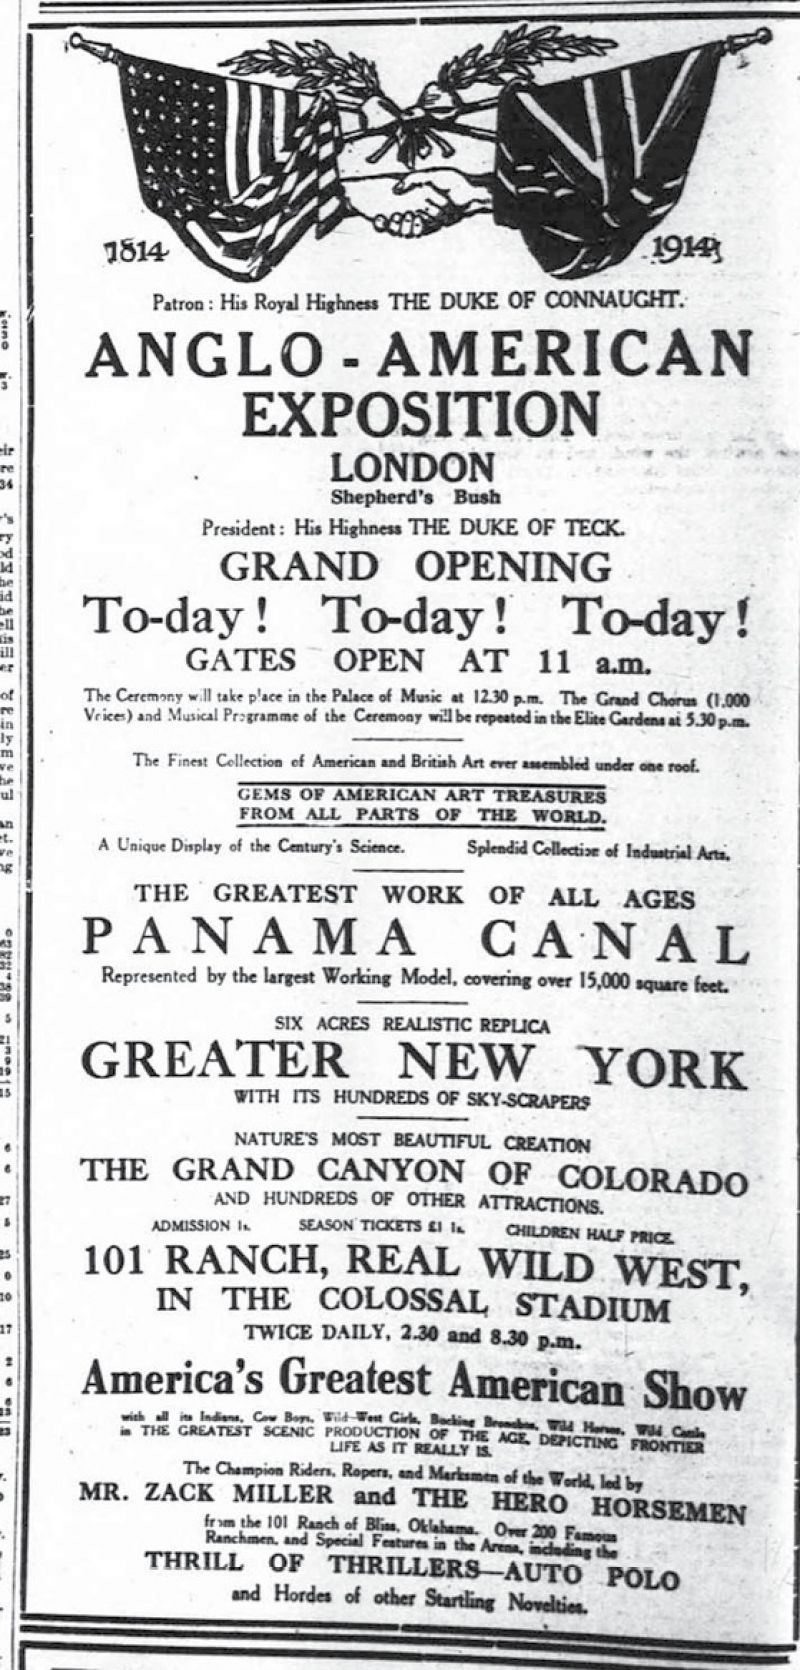 A 1914 ad in The London Times.